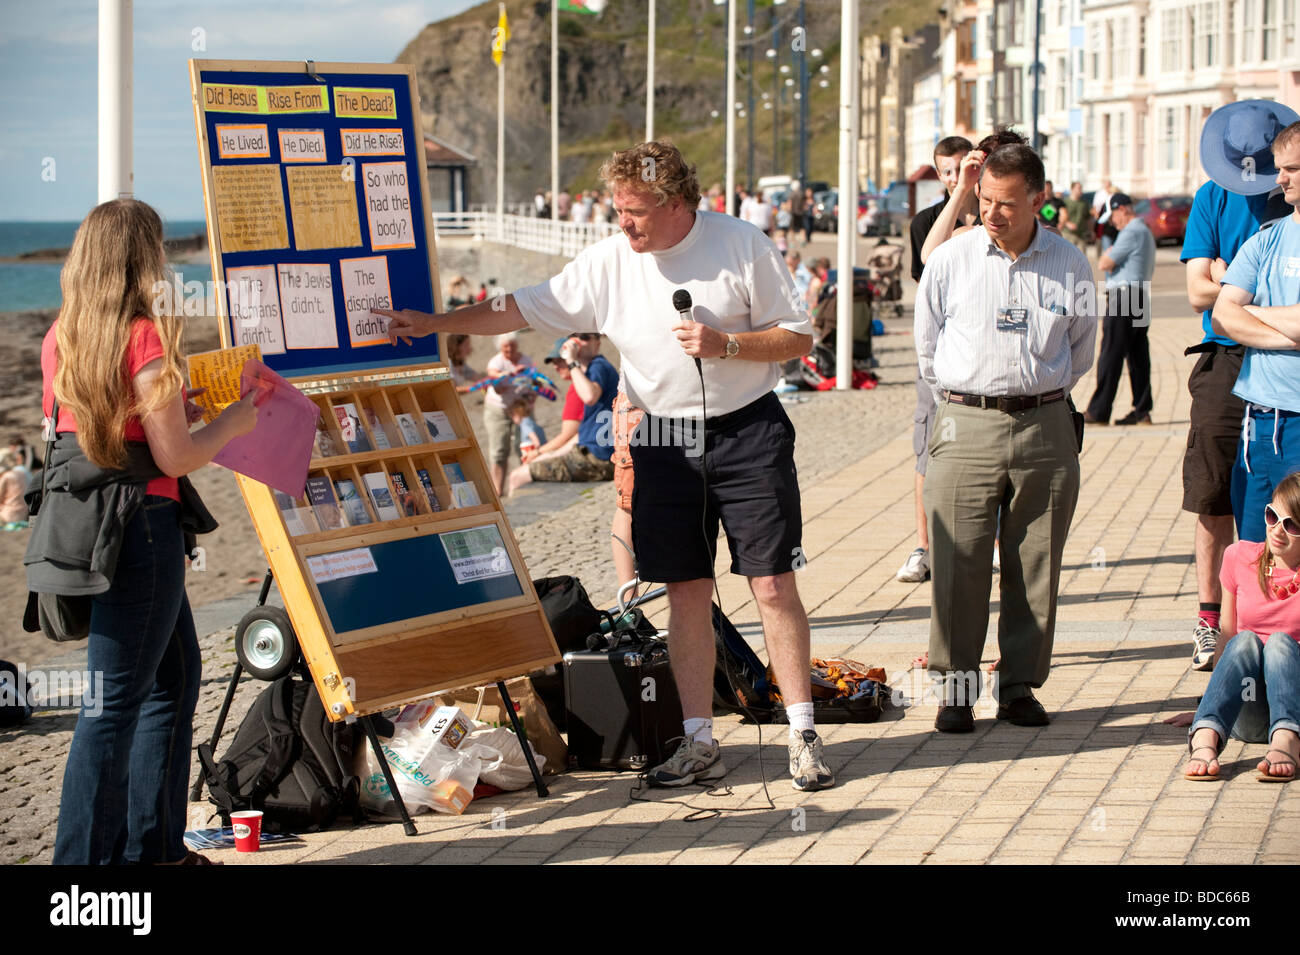 Born again Christian evangelist proselytizing on the street as part of a seaside beach mission Aberystwyth Wales UK Stock Photo